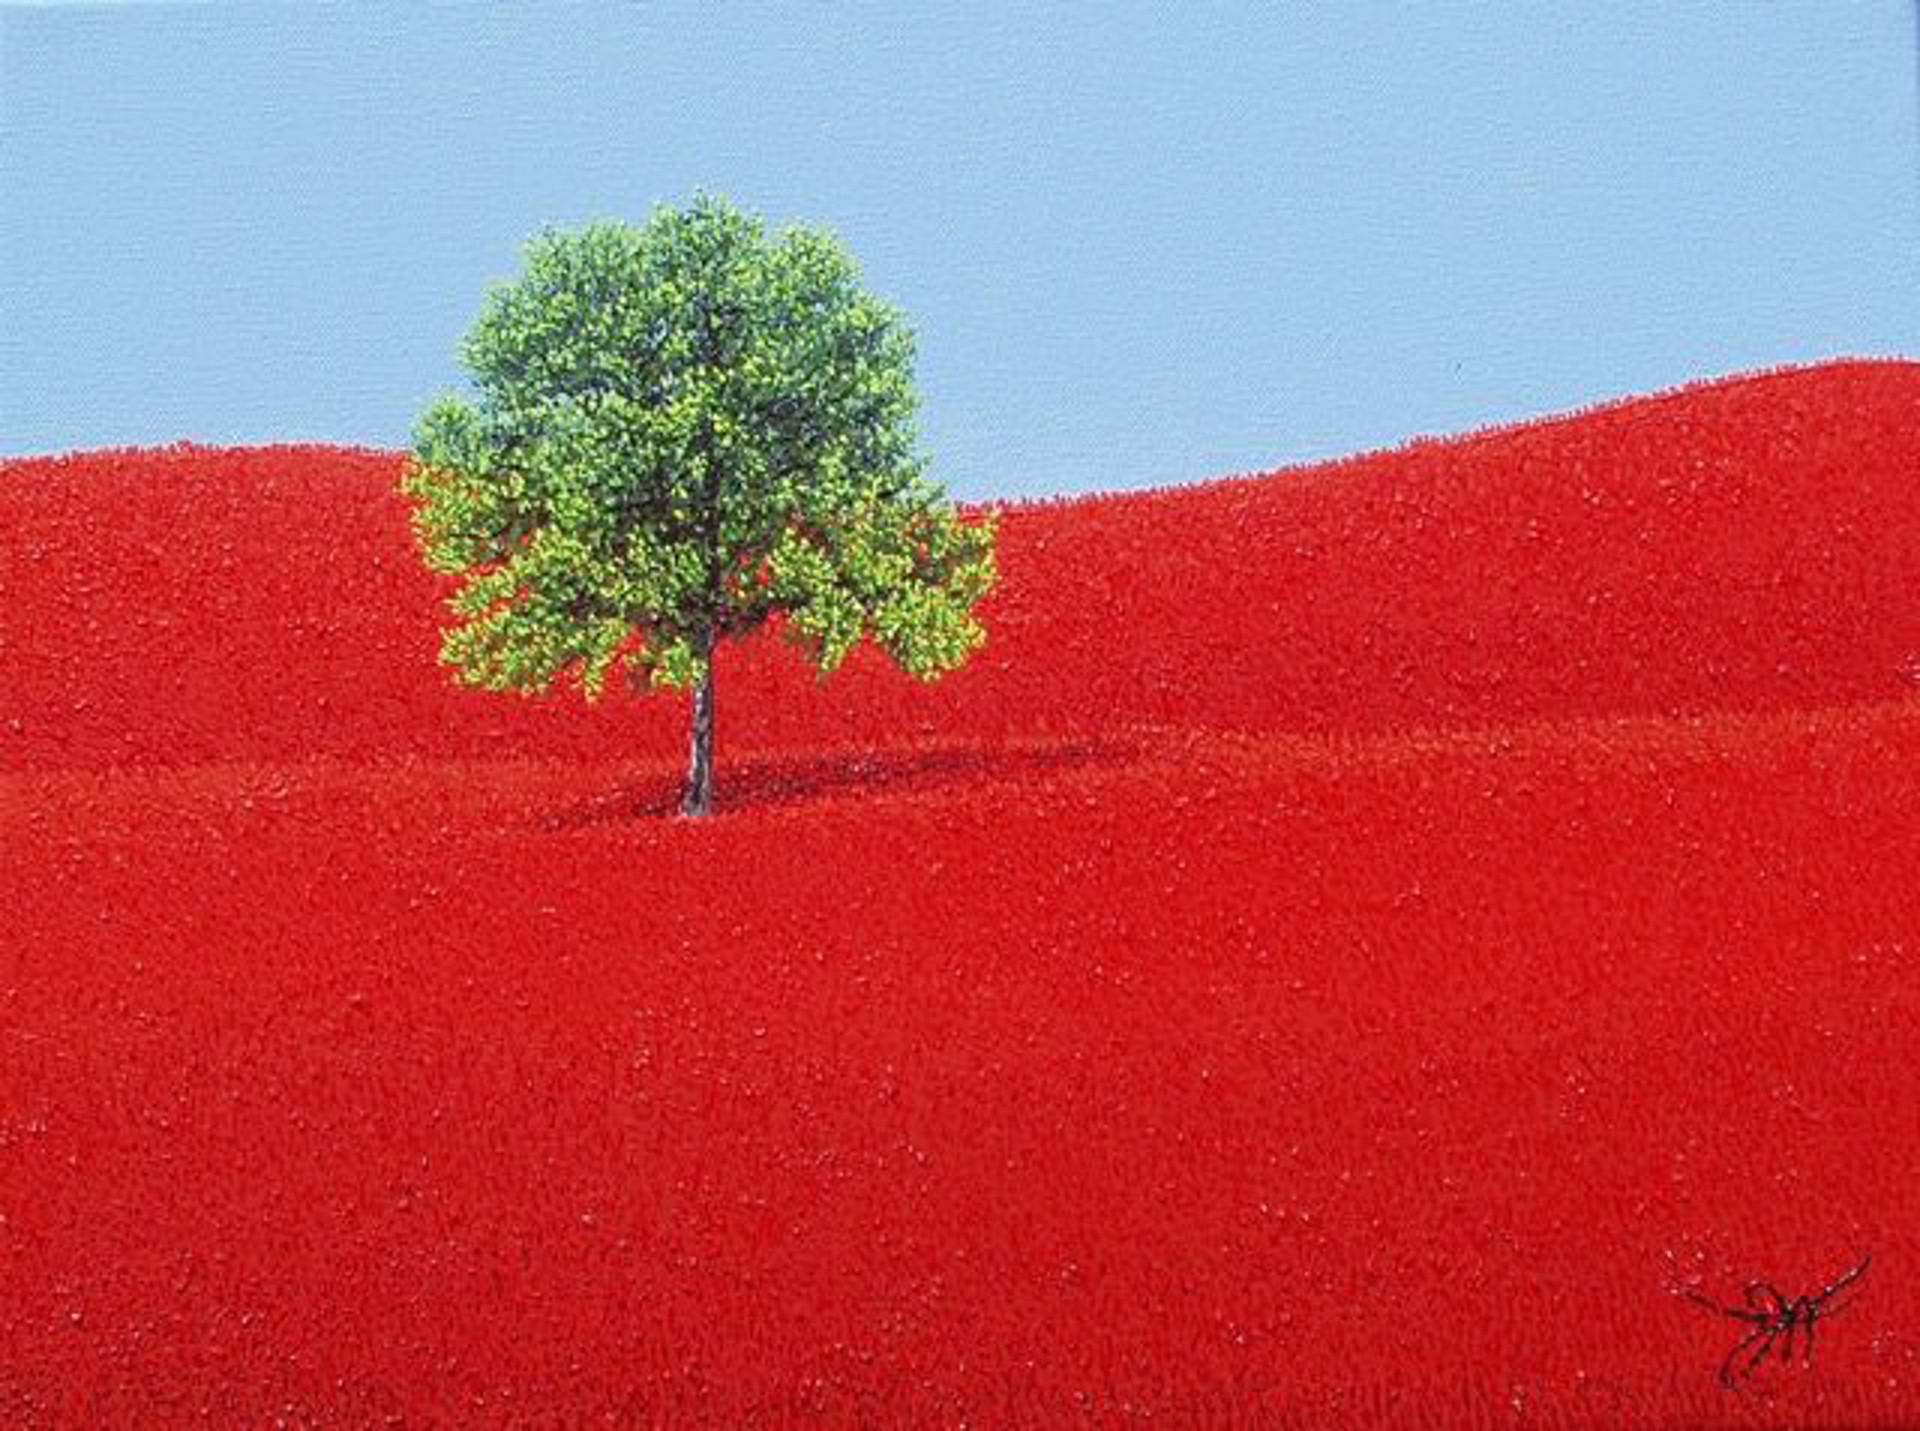 Solitude in Red by Jay Maggio